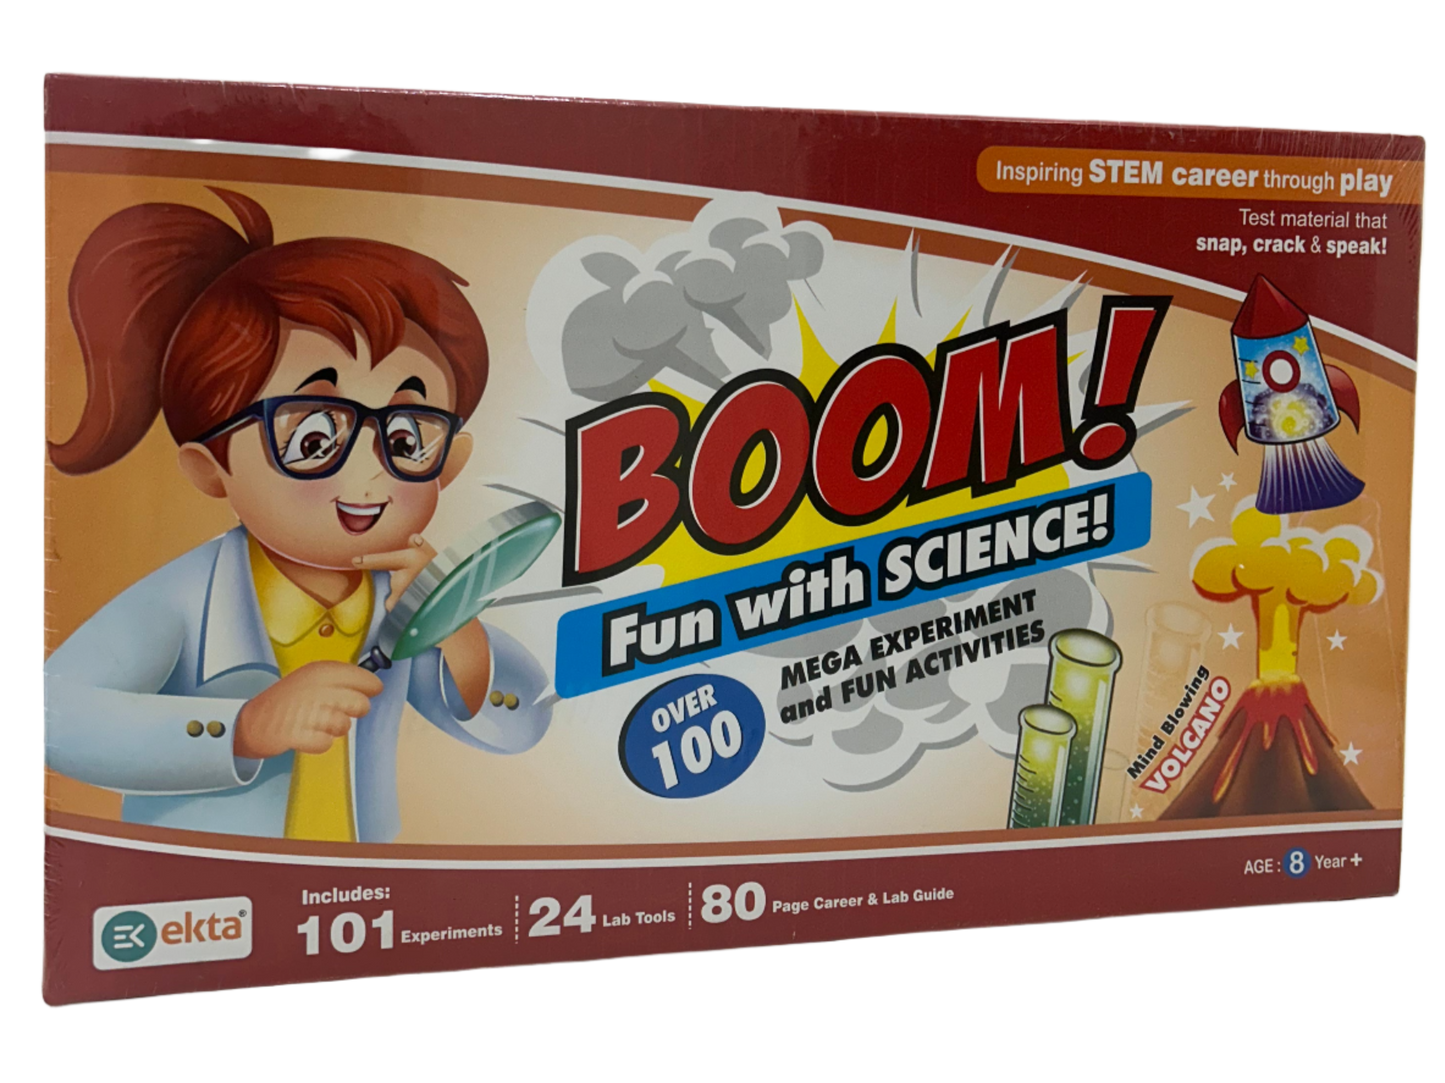 BOOM - Fun with Science